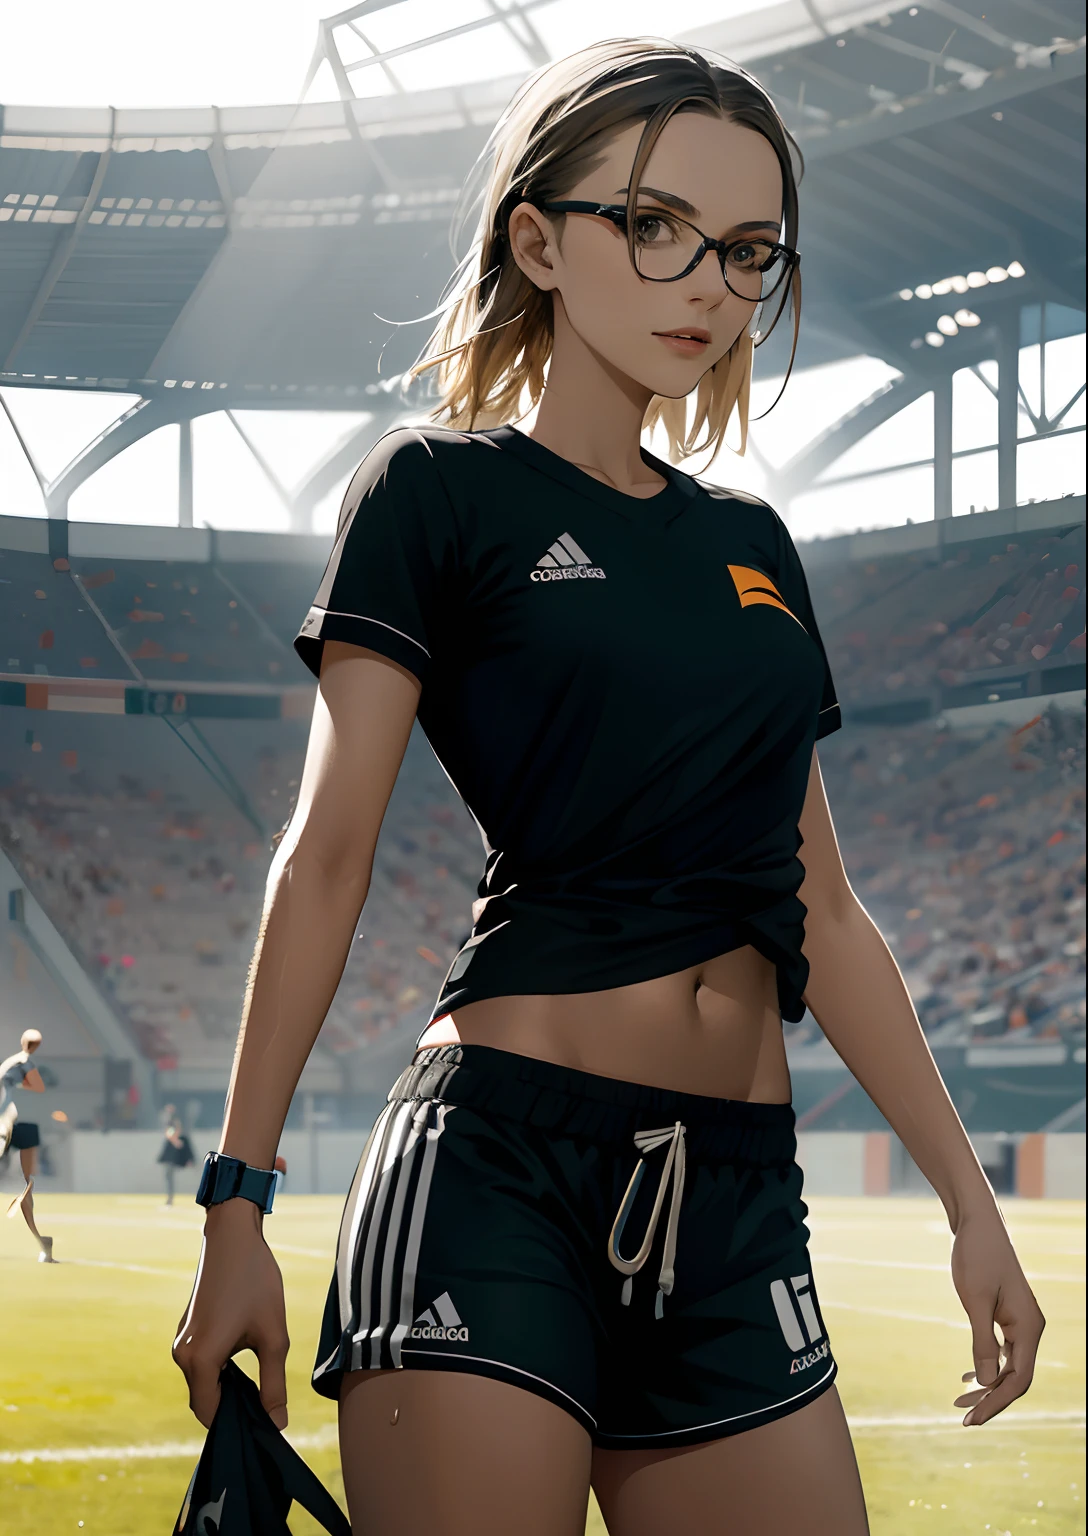 arafed woman in glasses and a black shirt standing on a field, on the field, on a soccer field, mia kischner, full body, close up, textured, wearing shorts and t shirt, marta syrko, sporty, on a football field, dressed in a top and shorts, dasha taran, 🚿🗝📝, aleksandra waliszewska